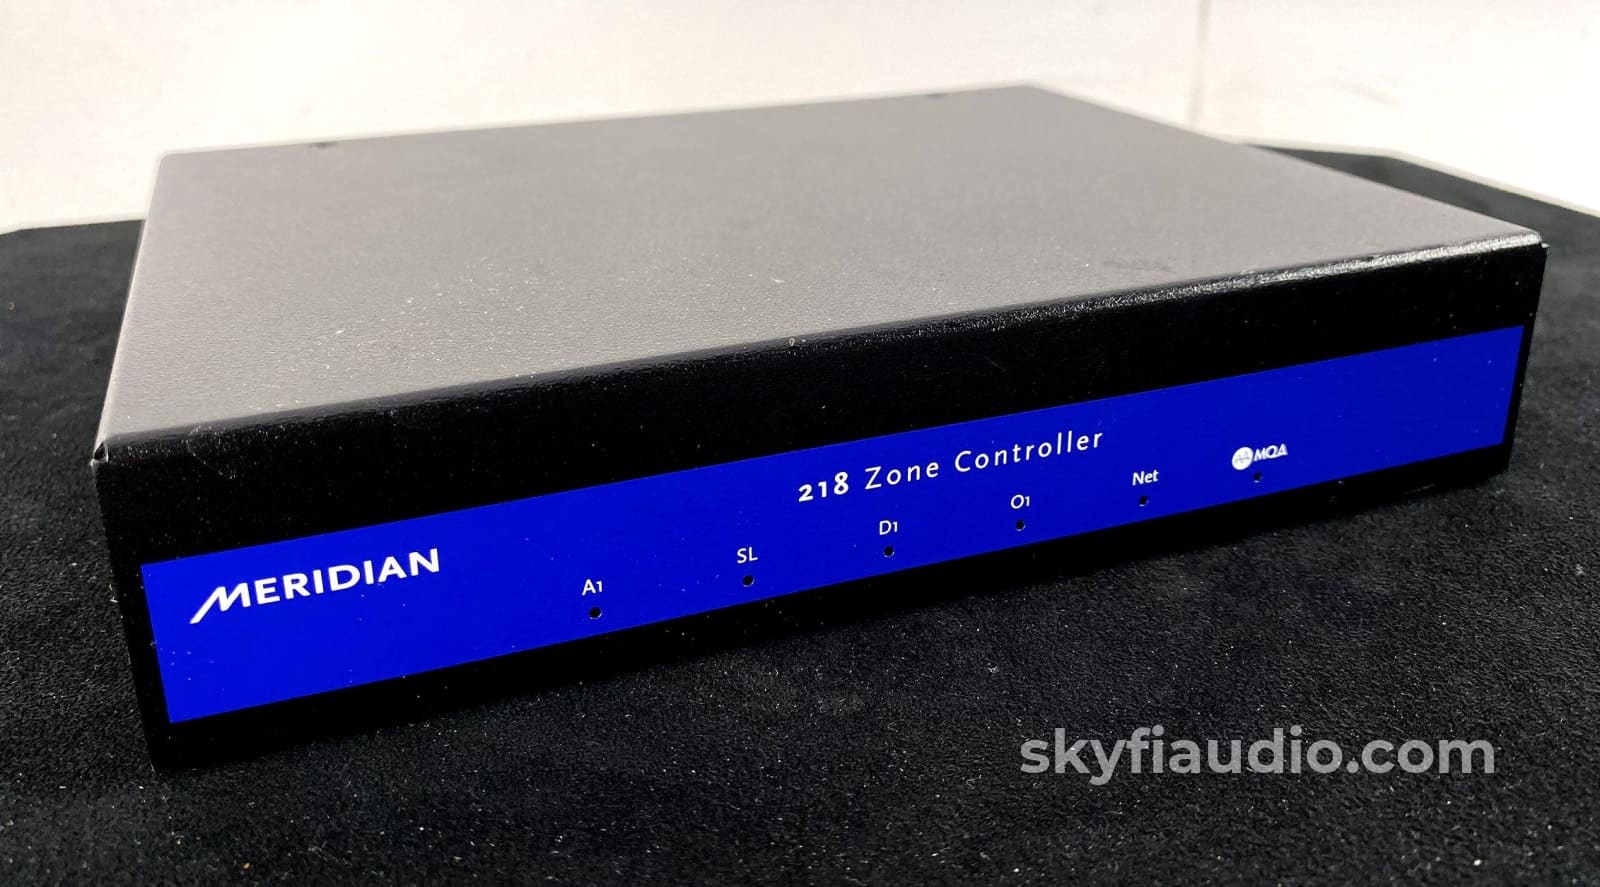 Meridian 218 Zone Controller Mqa Network Streamer And Dac (Roon Ready) Accessory